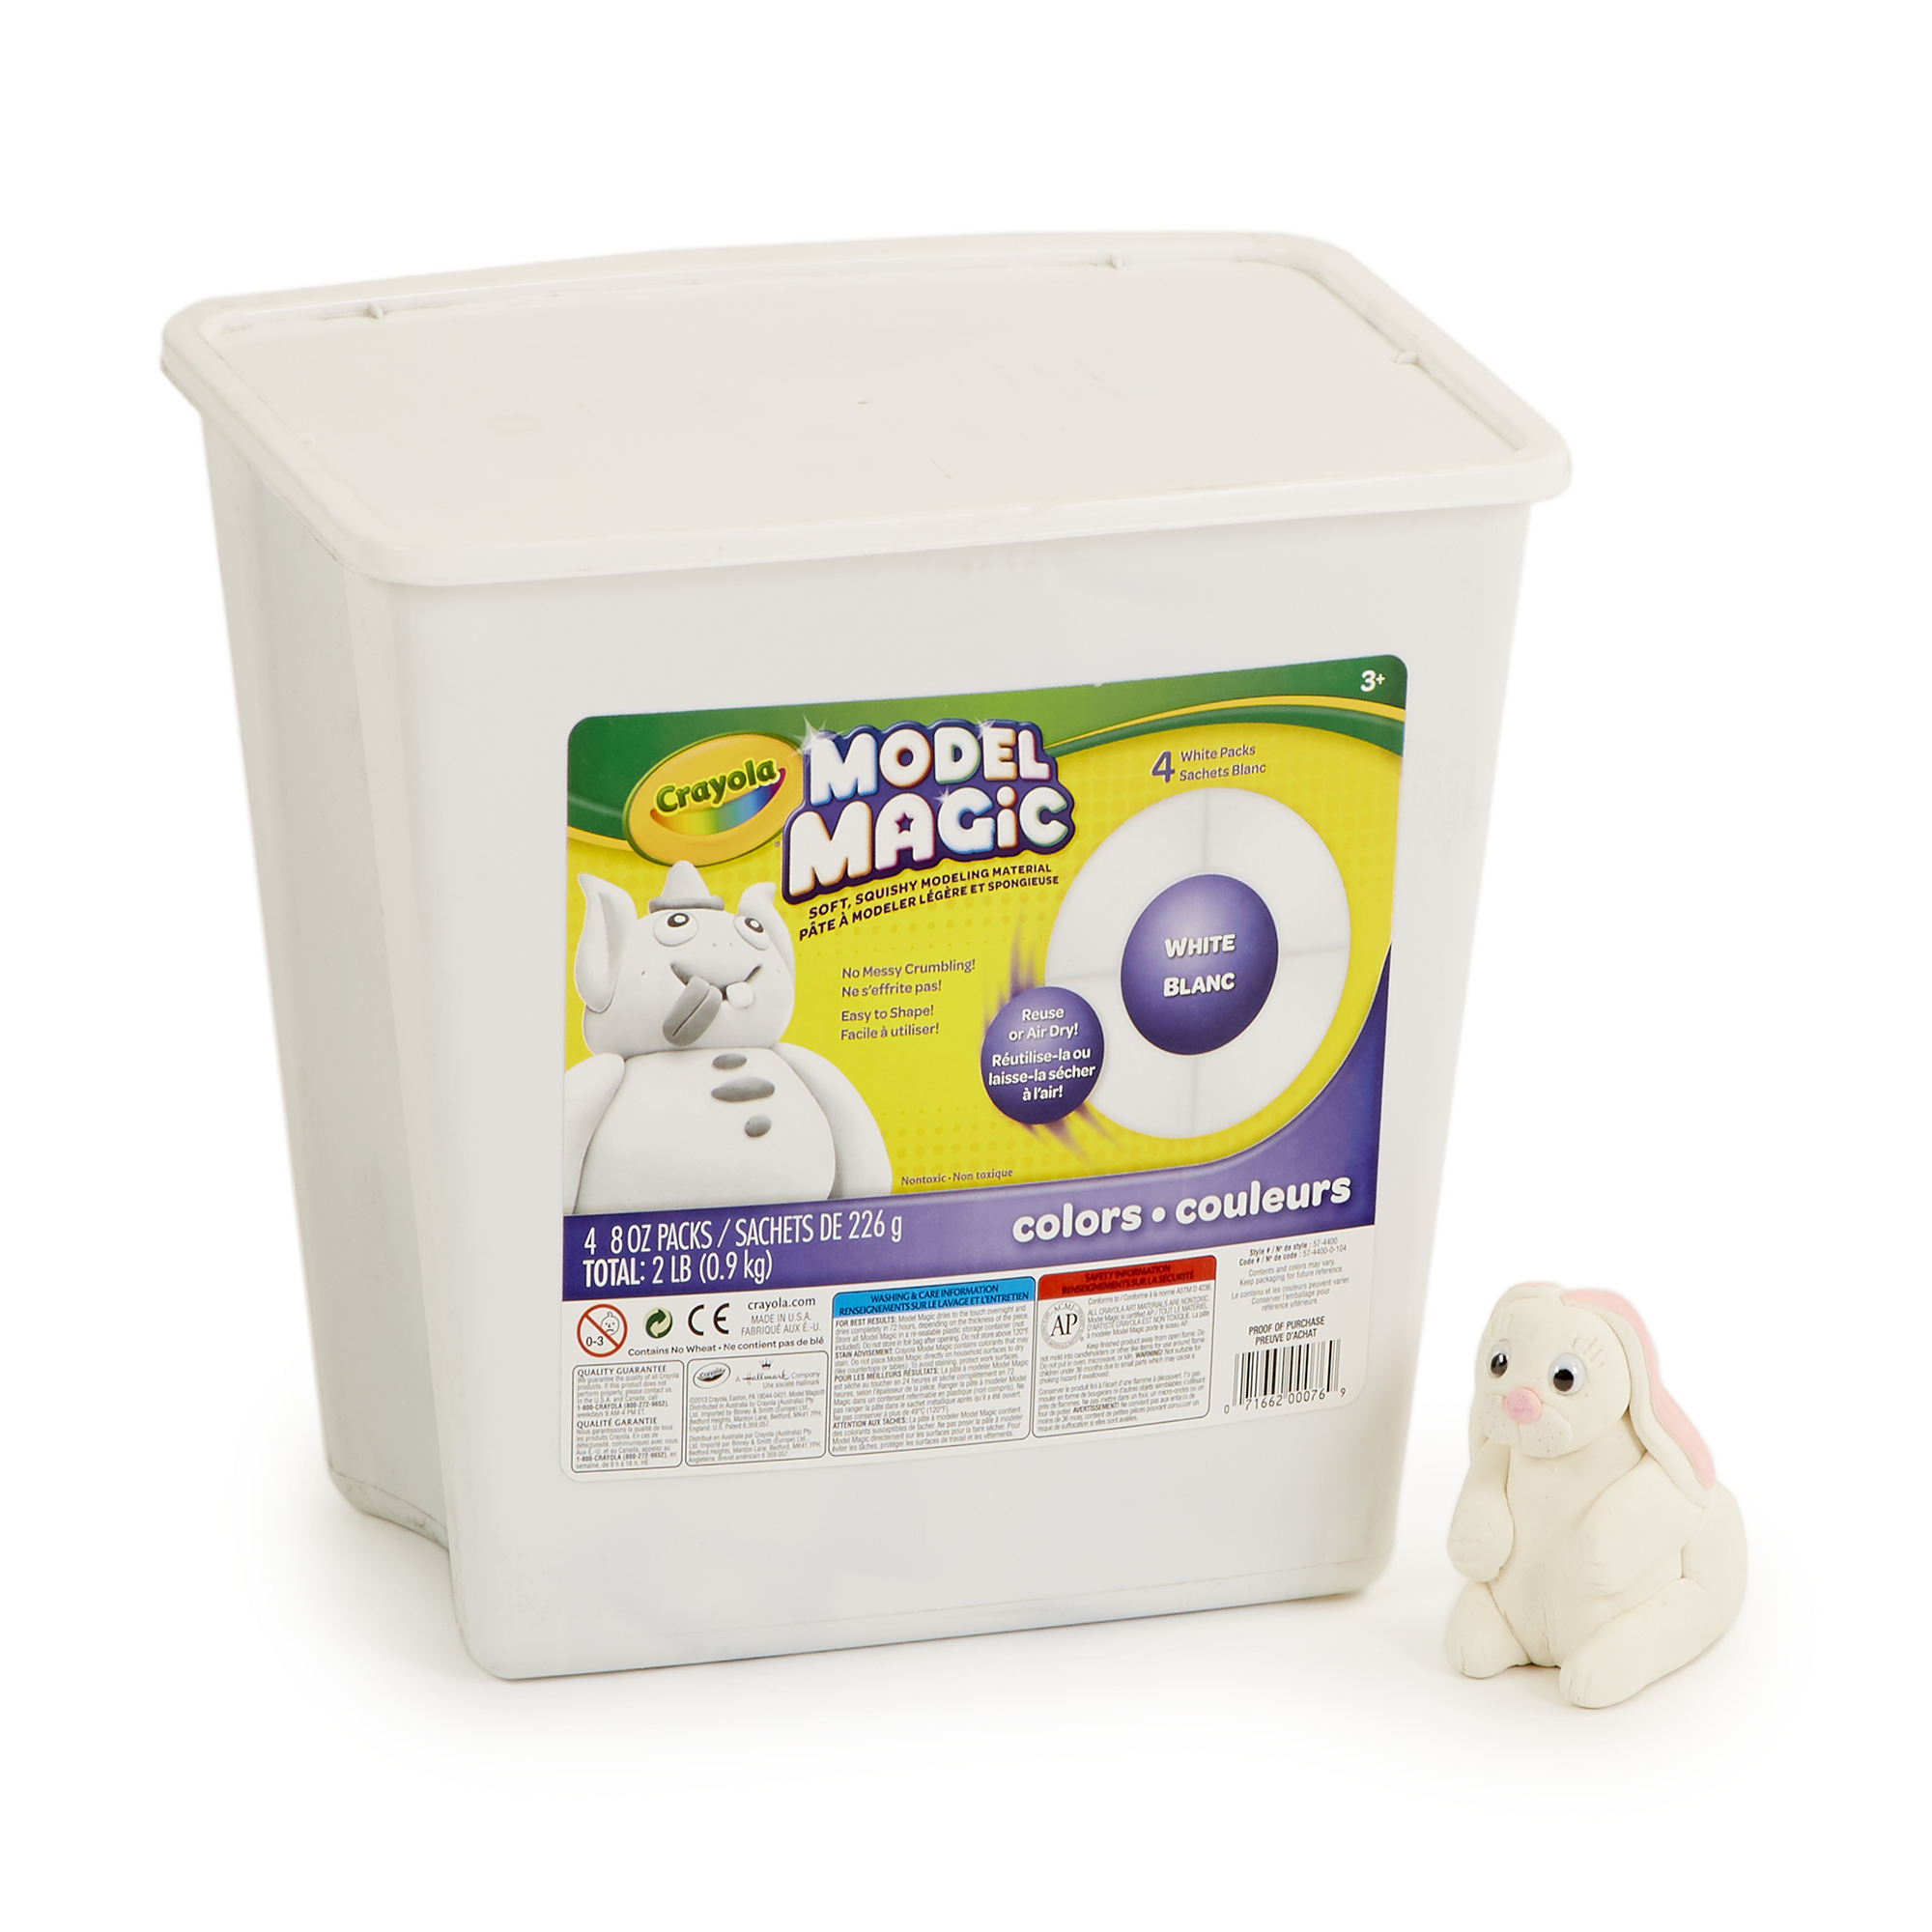 500g white, molding magic clay for